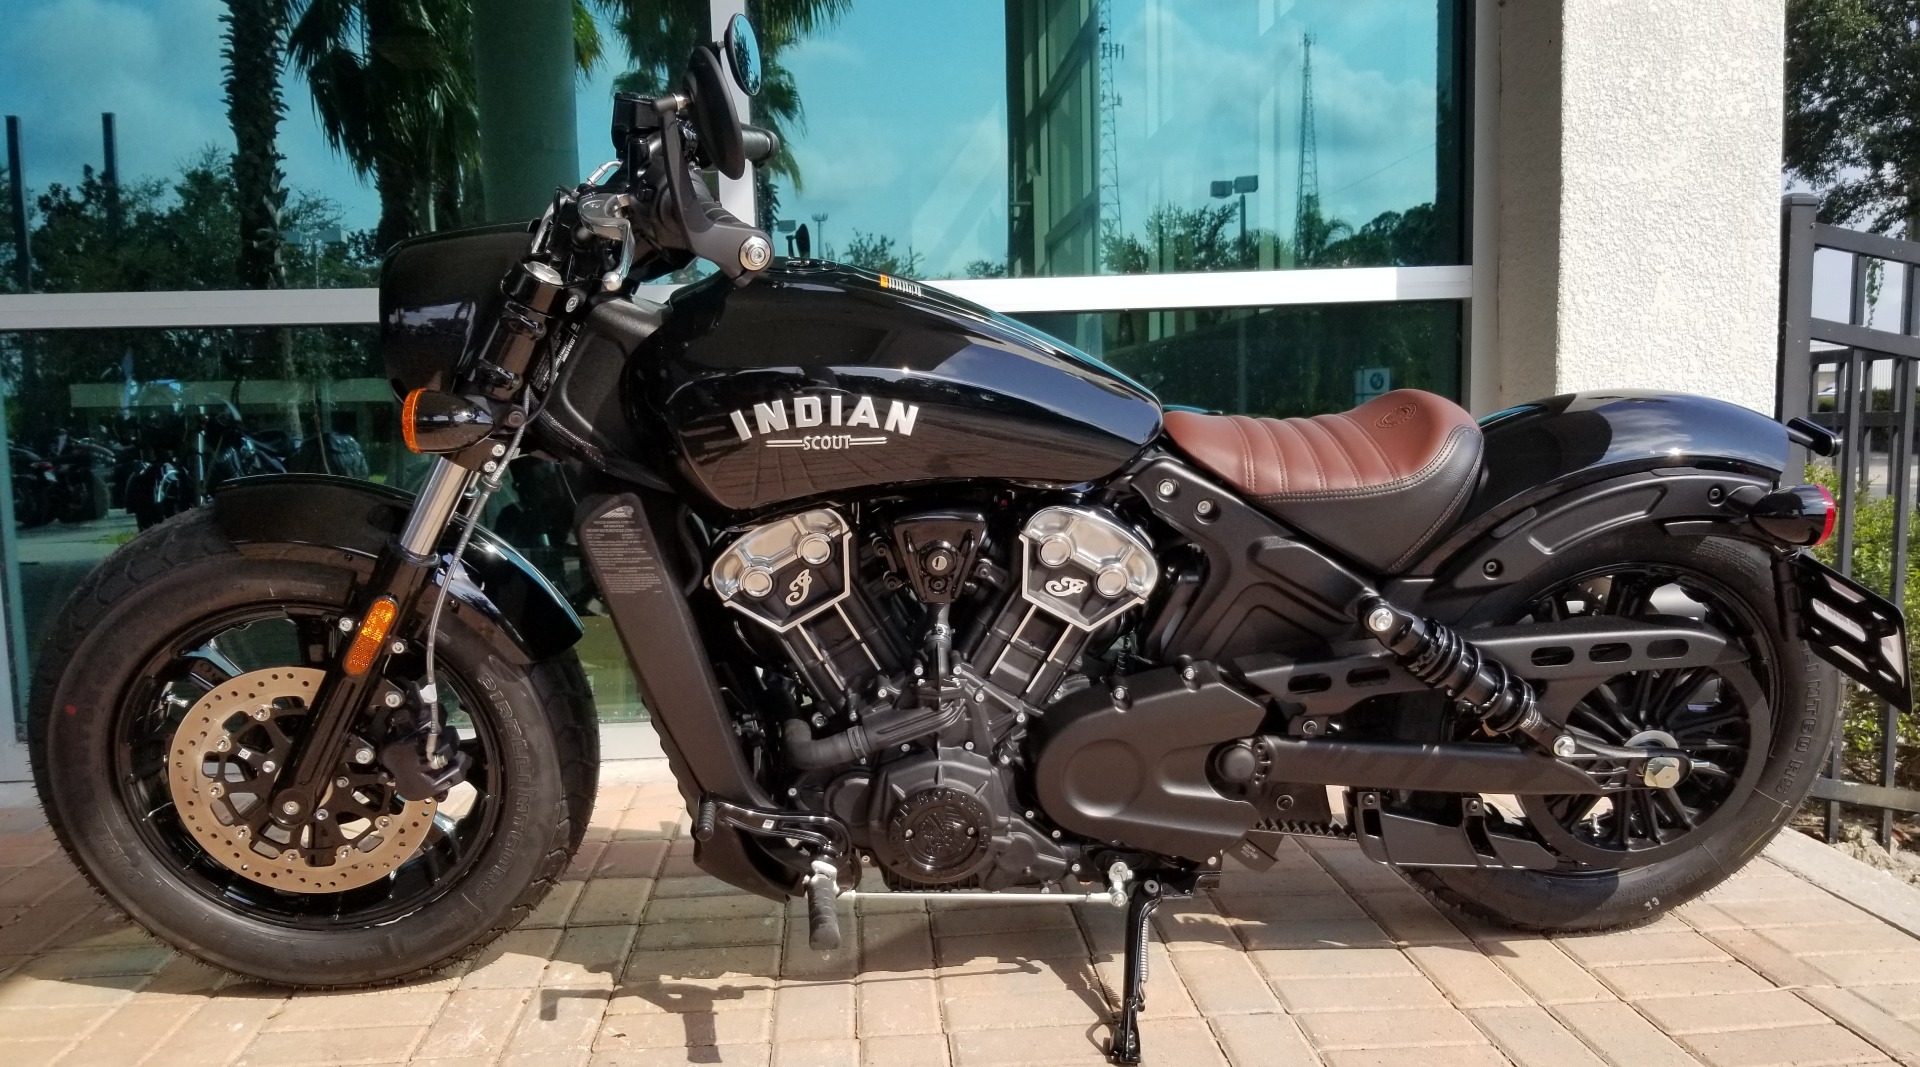 New 2020 Indian Scout® Bobber Thunder Black Motorcycles In Palm Bay Fl Ind155861 3353